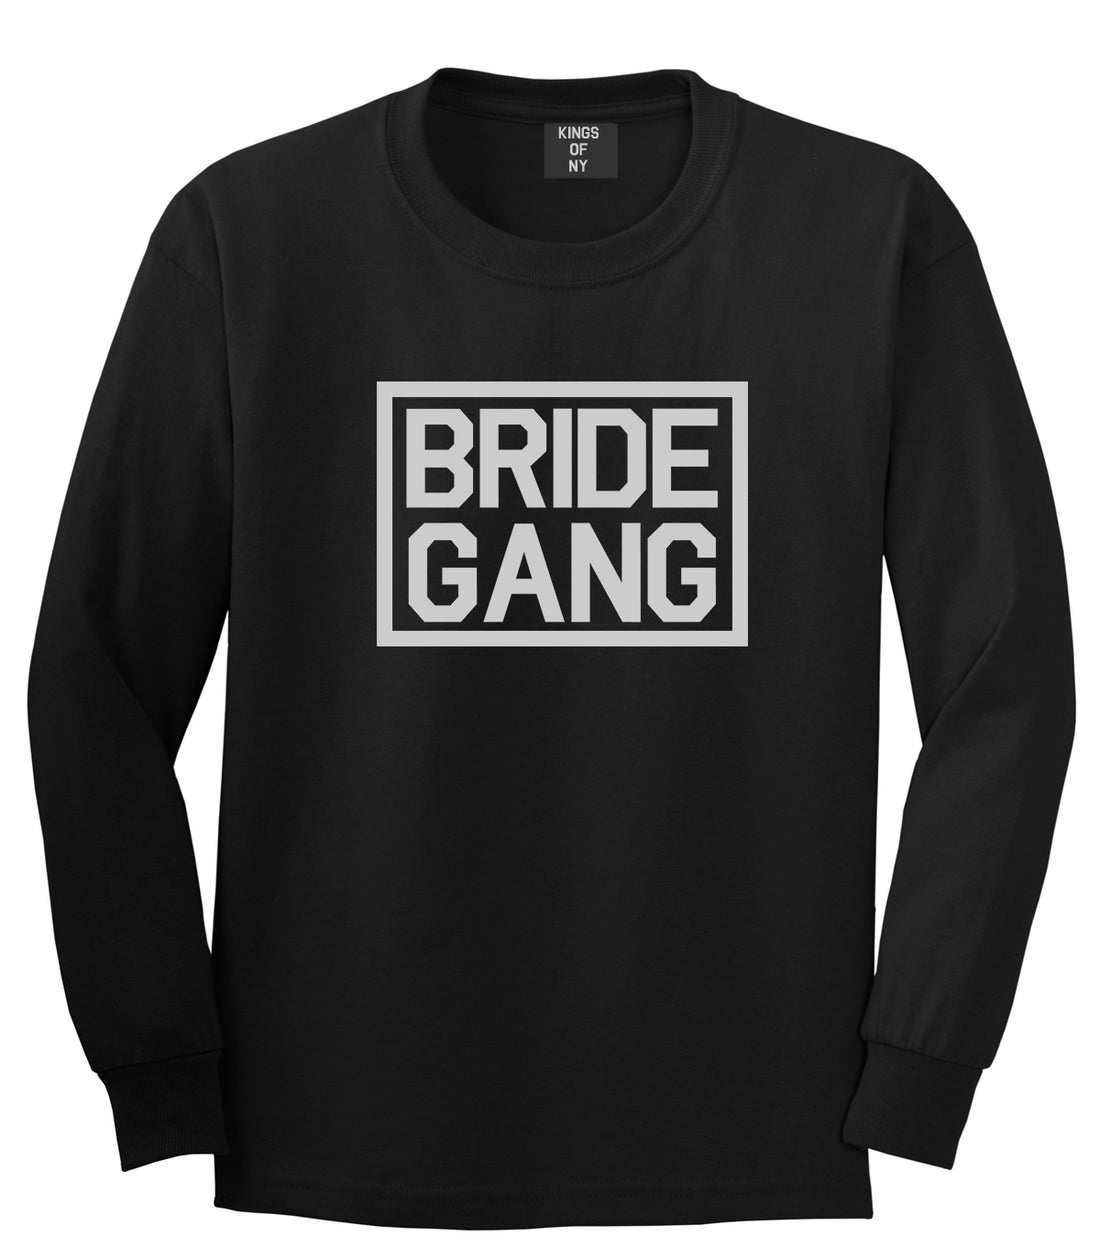 Bride Gang Bachlorette Party Black Long Sleeve T-Shirt by Kings Of NY